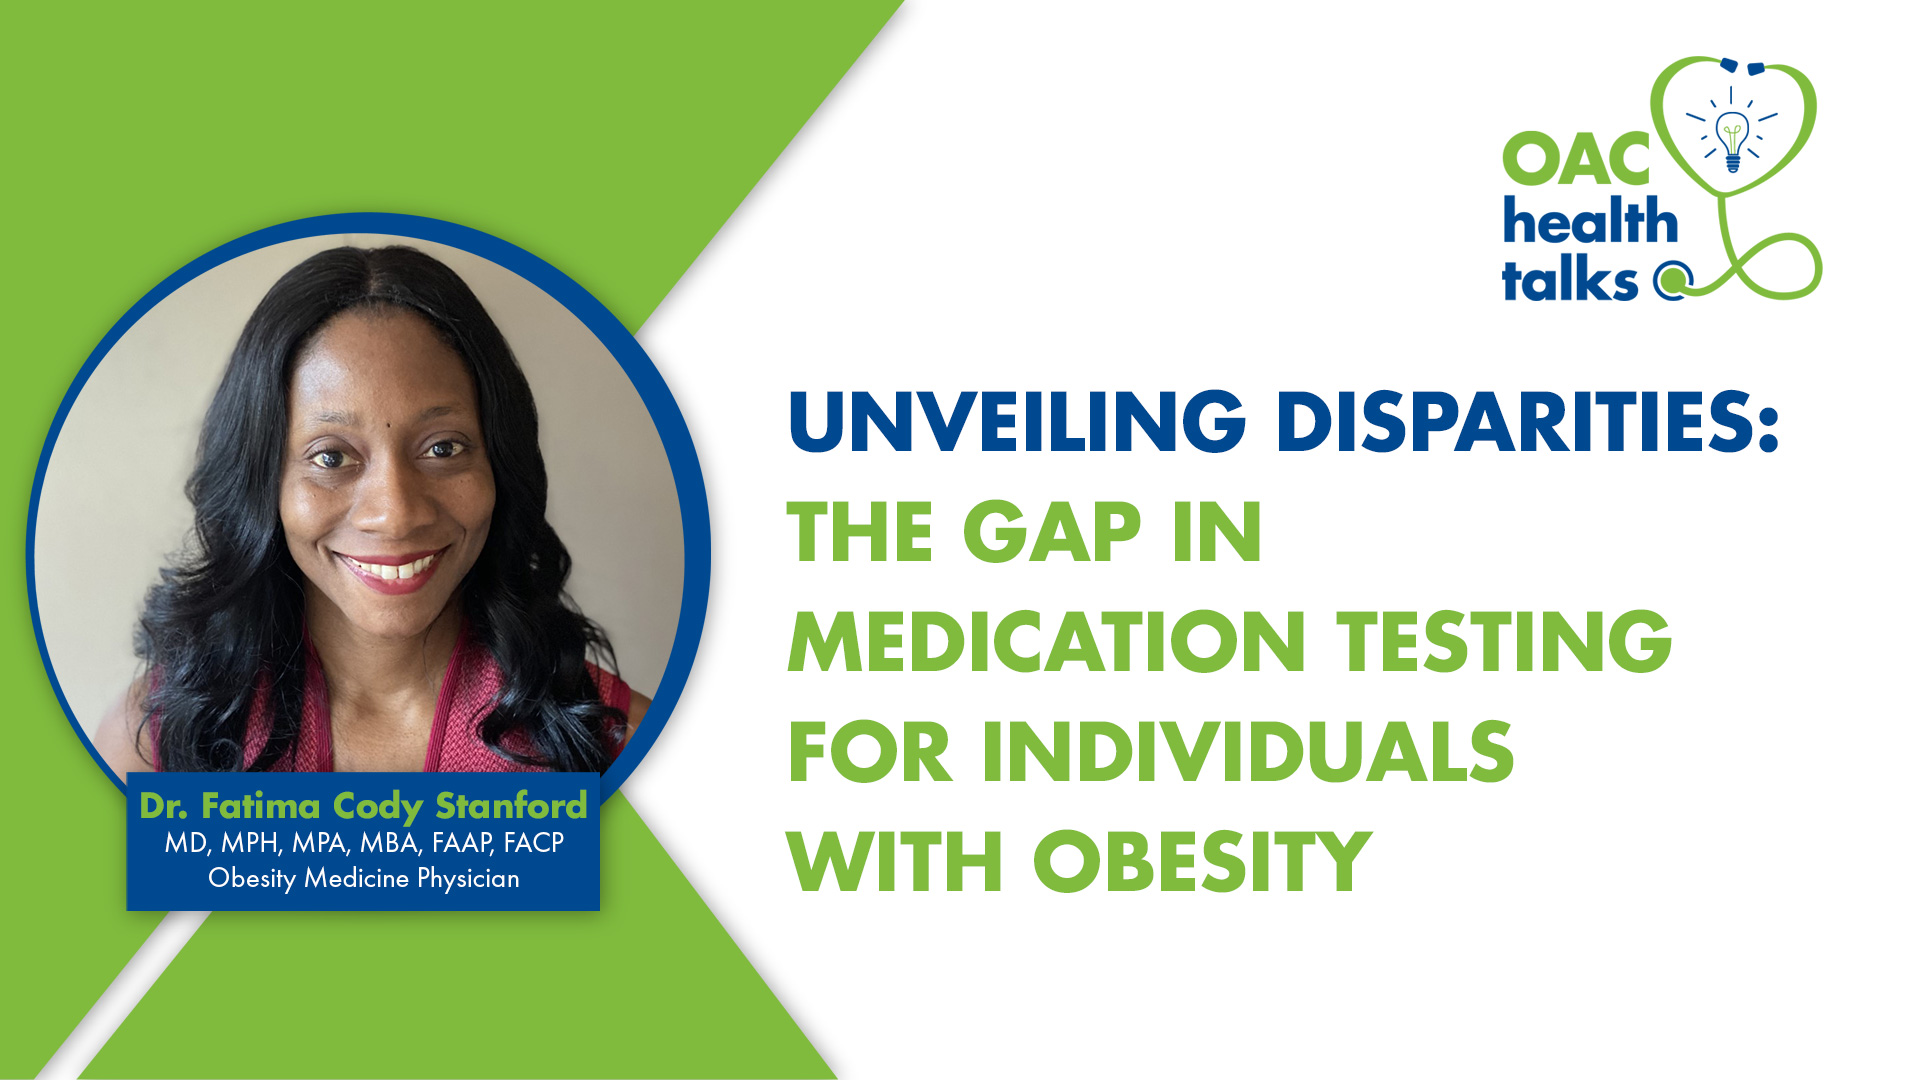 The Gap in Medication Testing for Individuals with Obesity